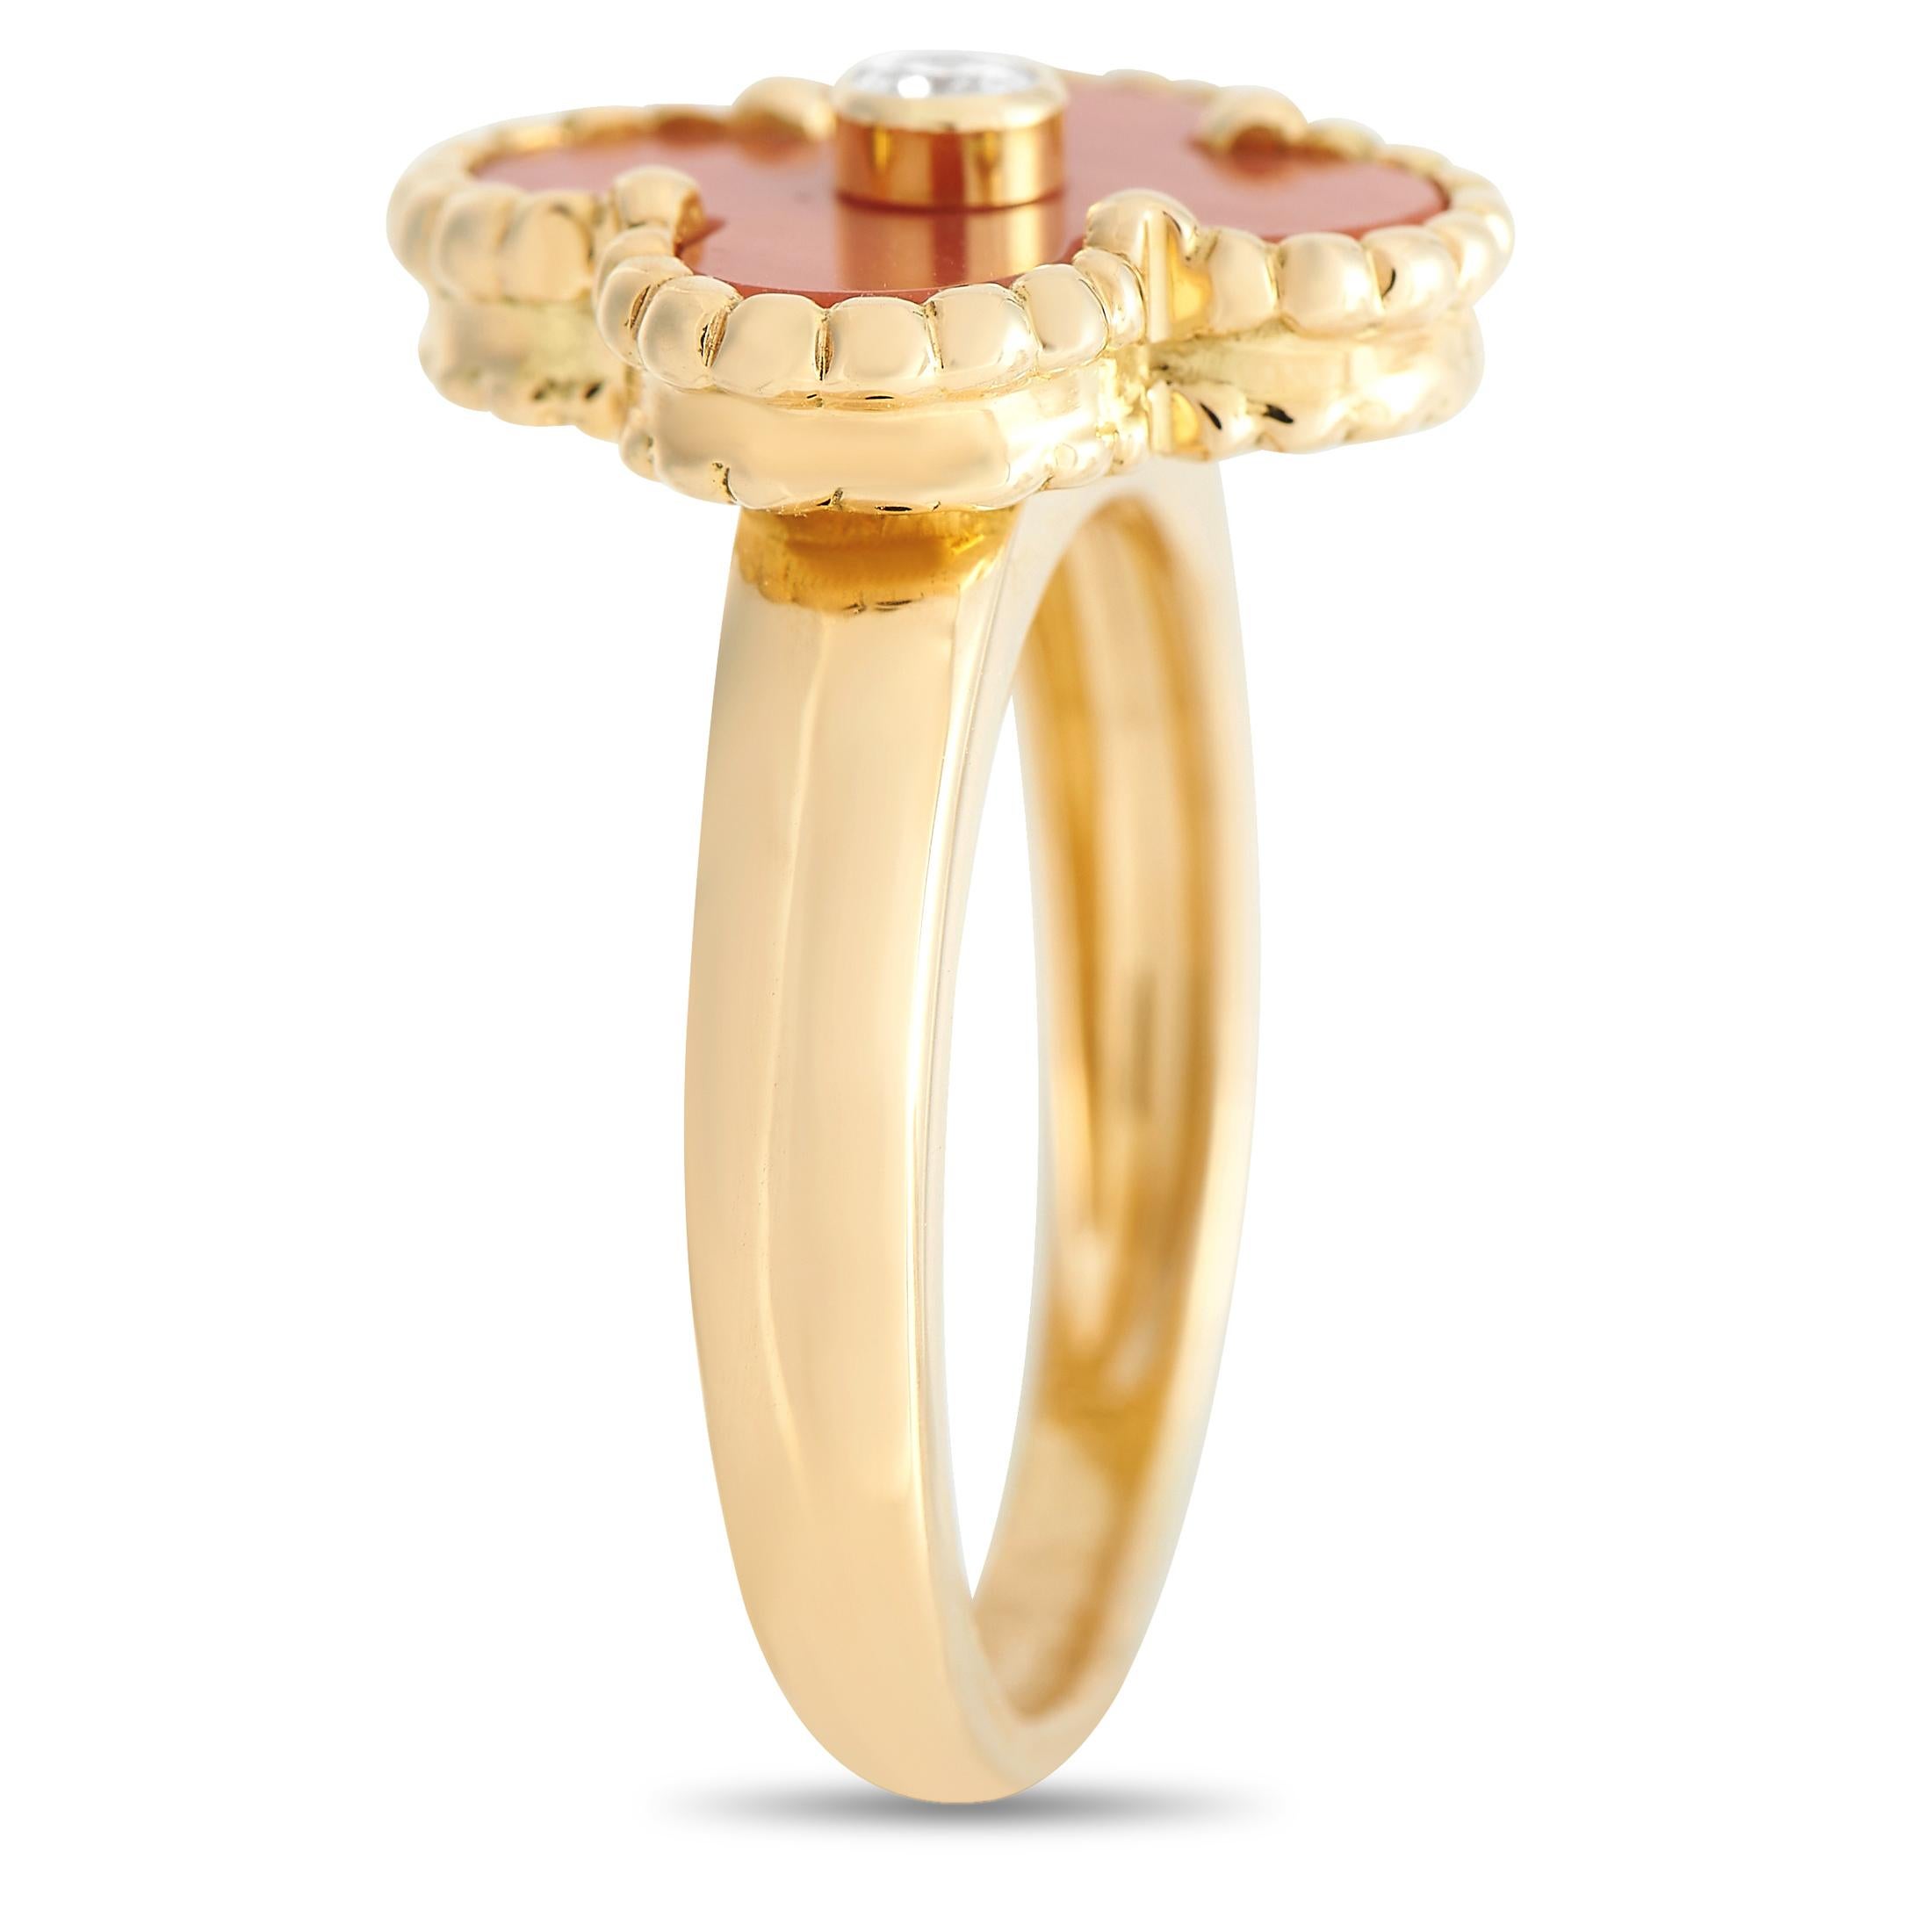 You're in luck! Here is another symbolic Alhambra to add to your collection. Crafted by Van Cleef & Arpels, this vintage Alhambra ring radiates timeless elegance. The yellow gold band is topped with the iconic four-leaf clover-inspired motif with a